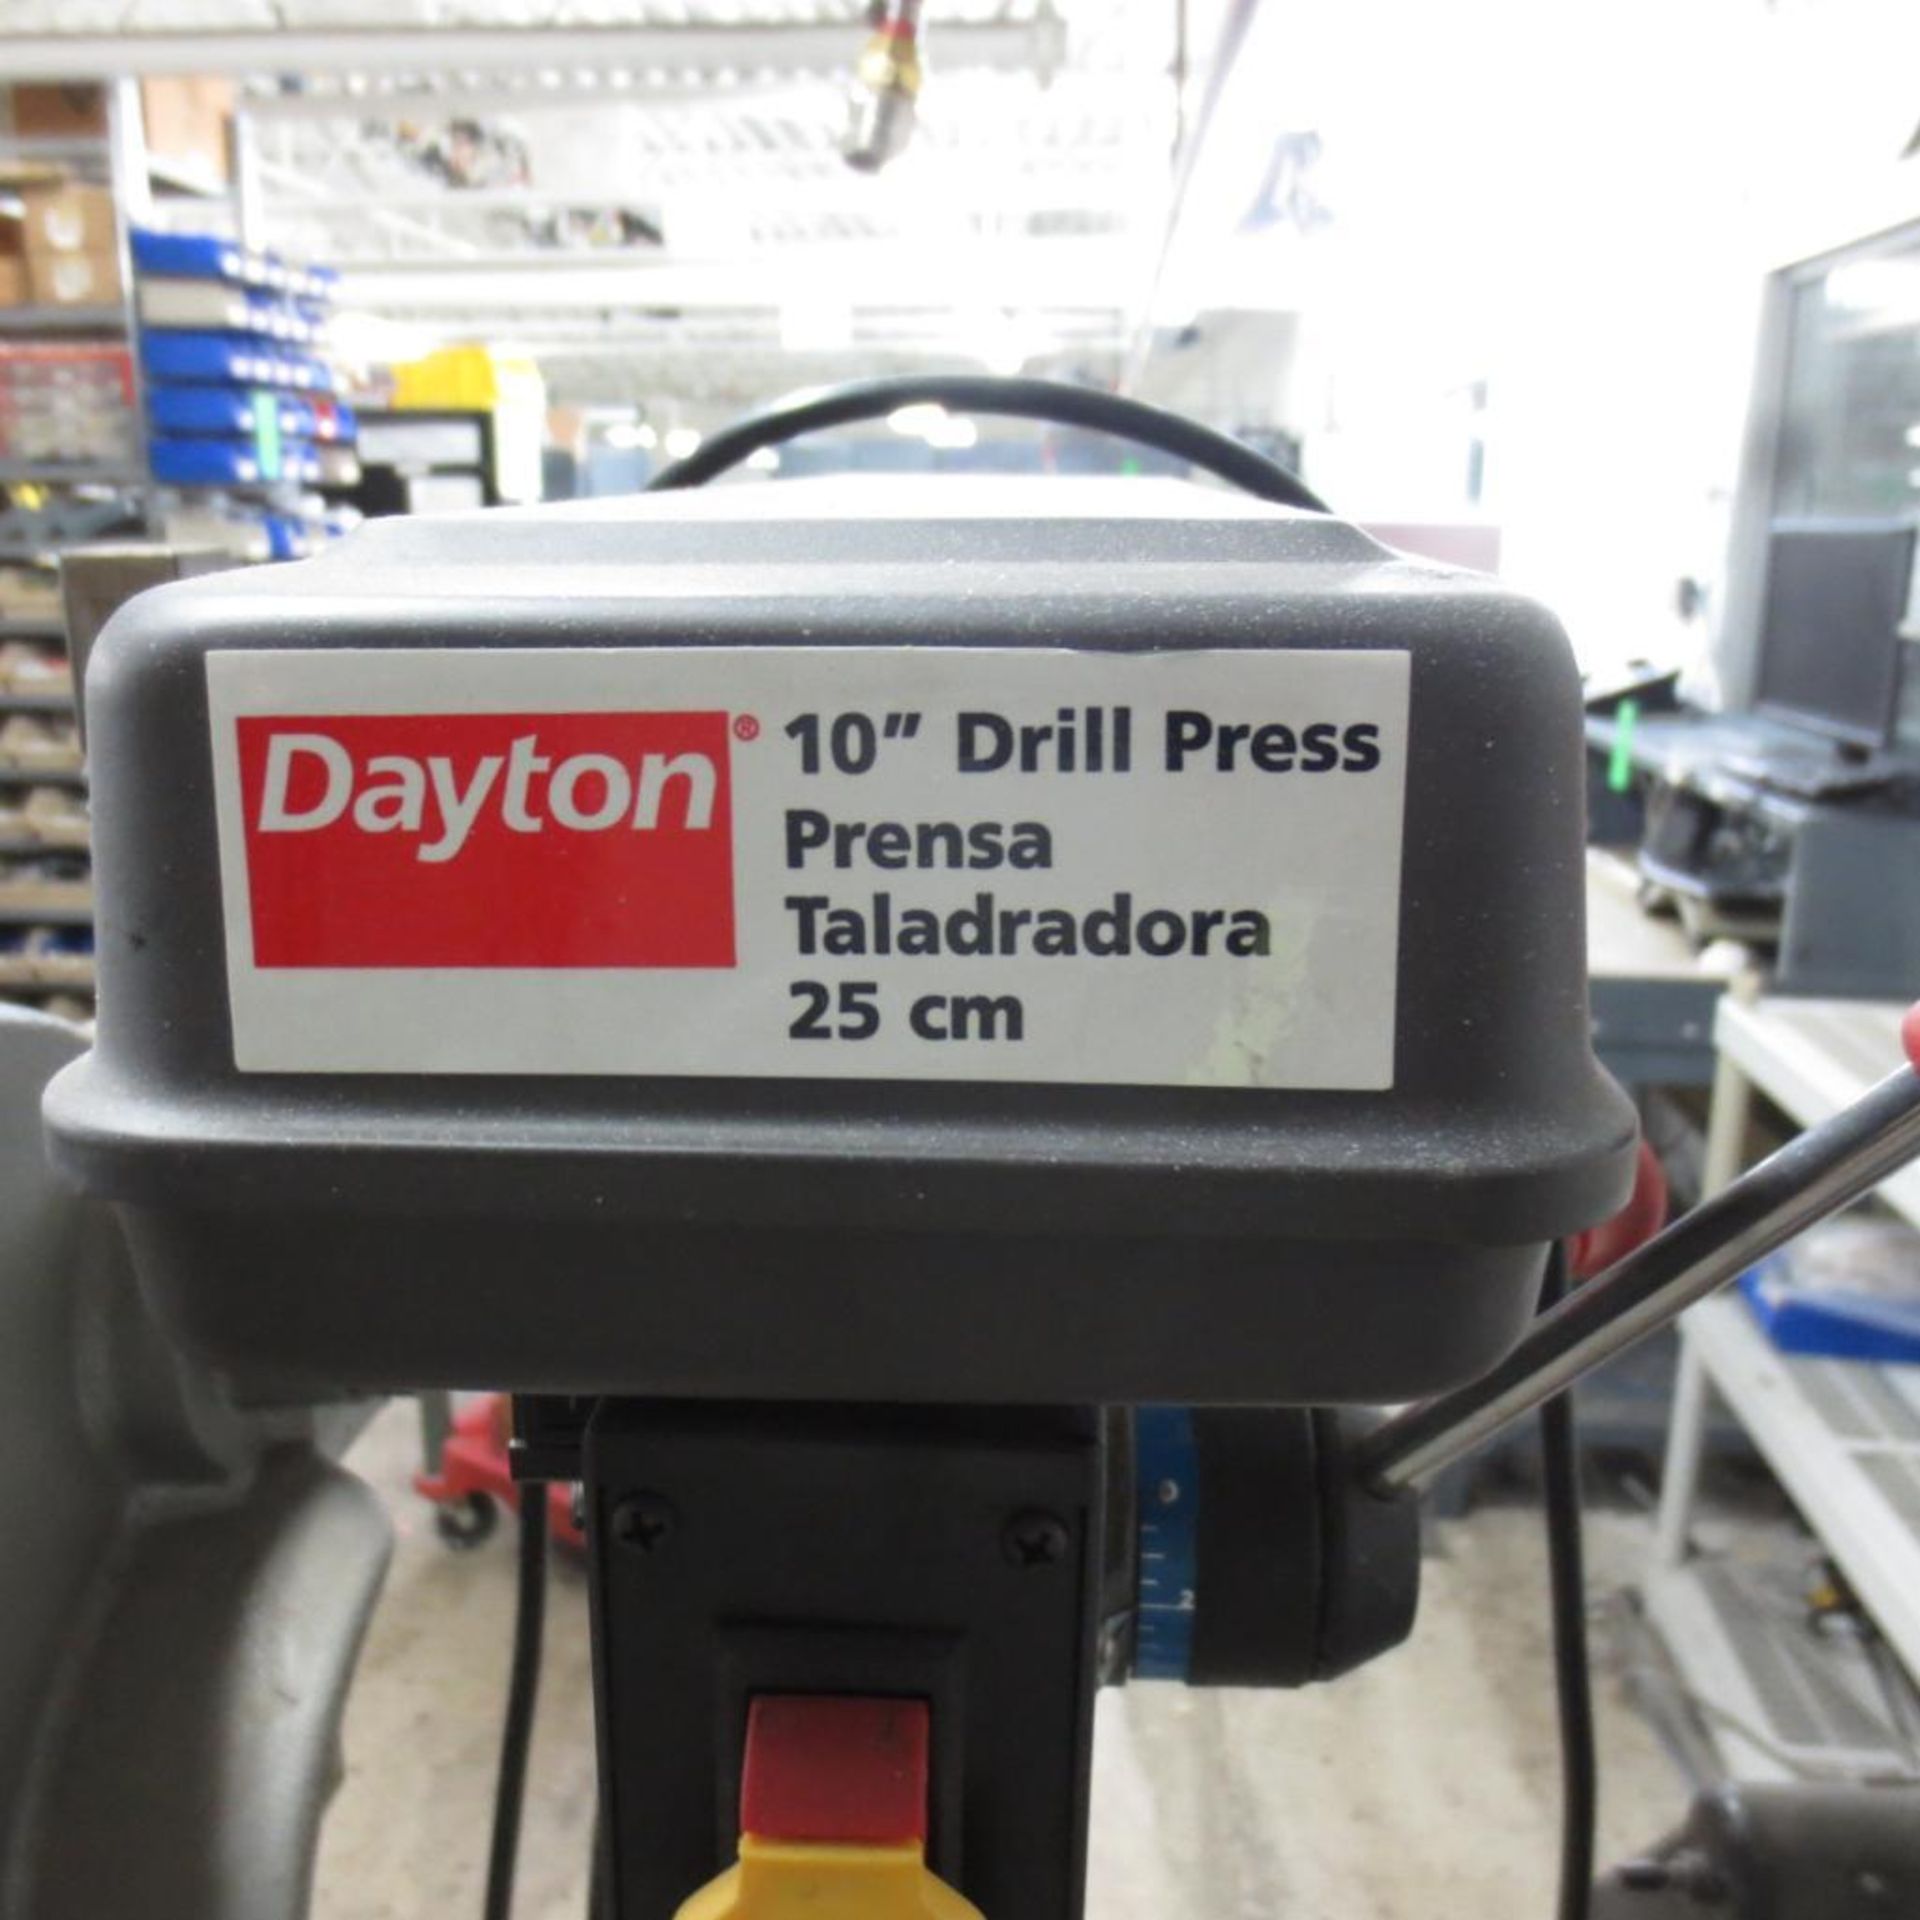 Stand With Arbor Press and Dayton 10" Drill Press Model 16N196, 120V, 1 PH ( Loc. On Mezzanine buyer - Image 5 of 5